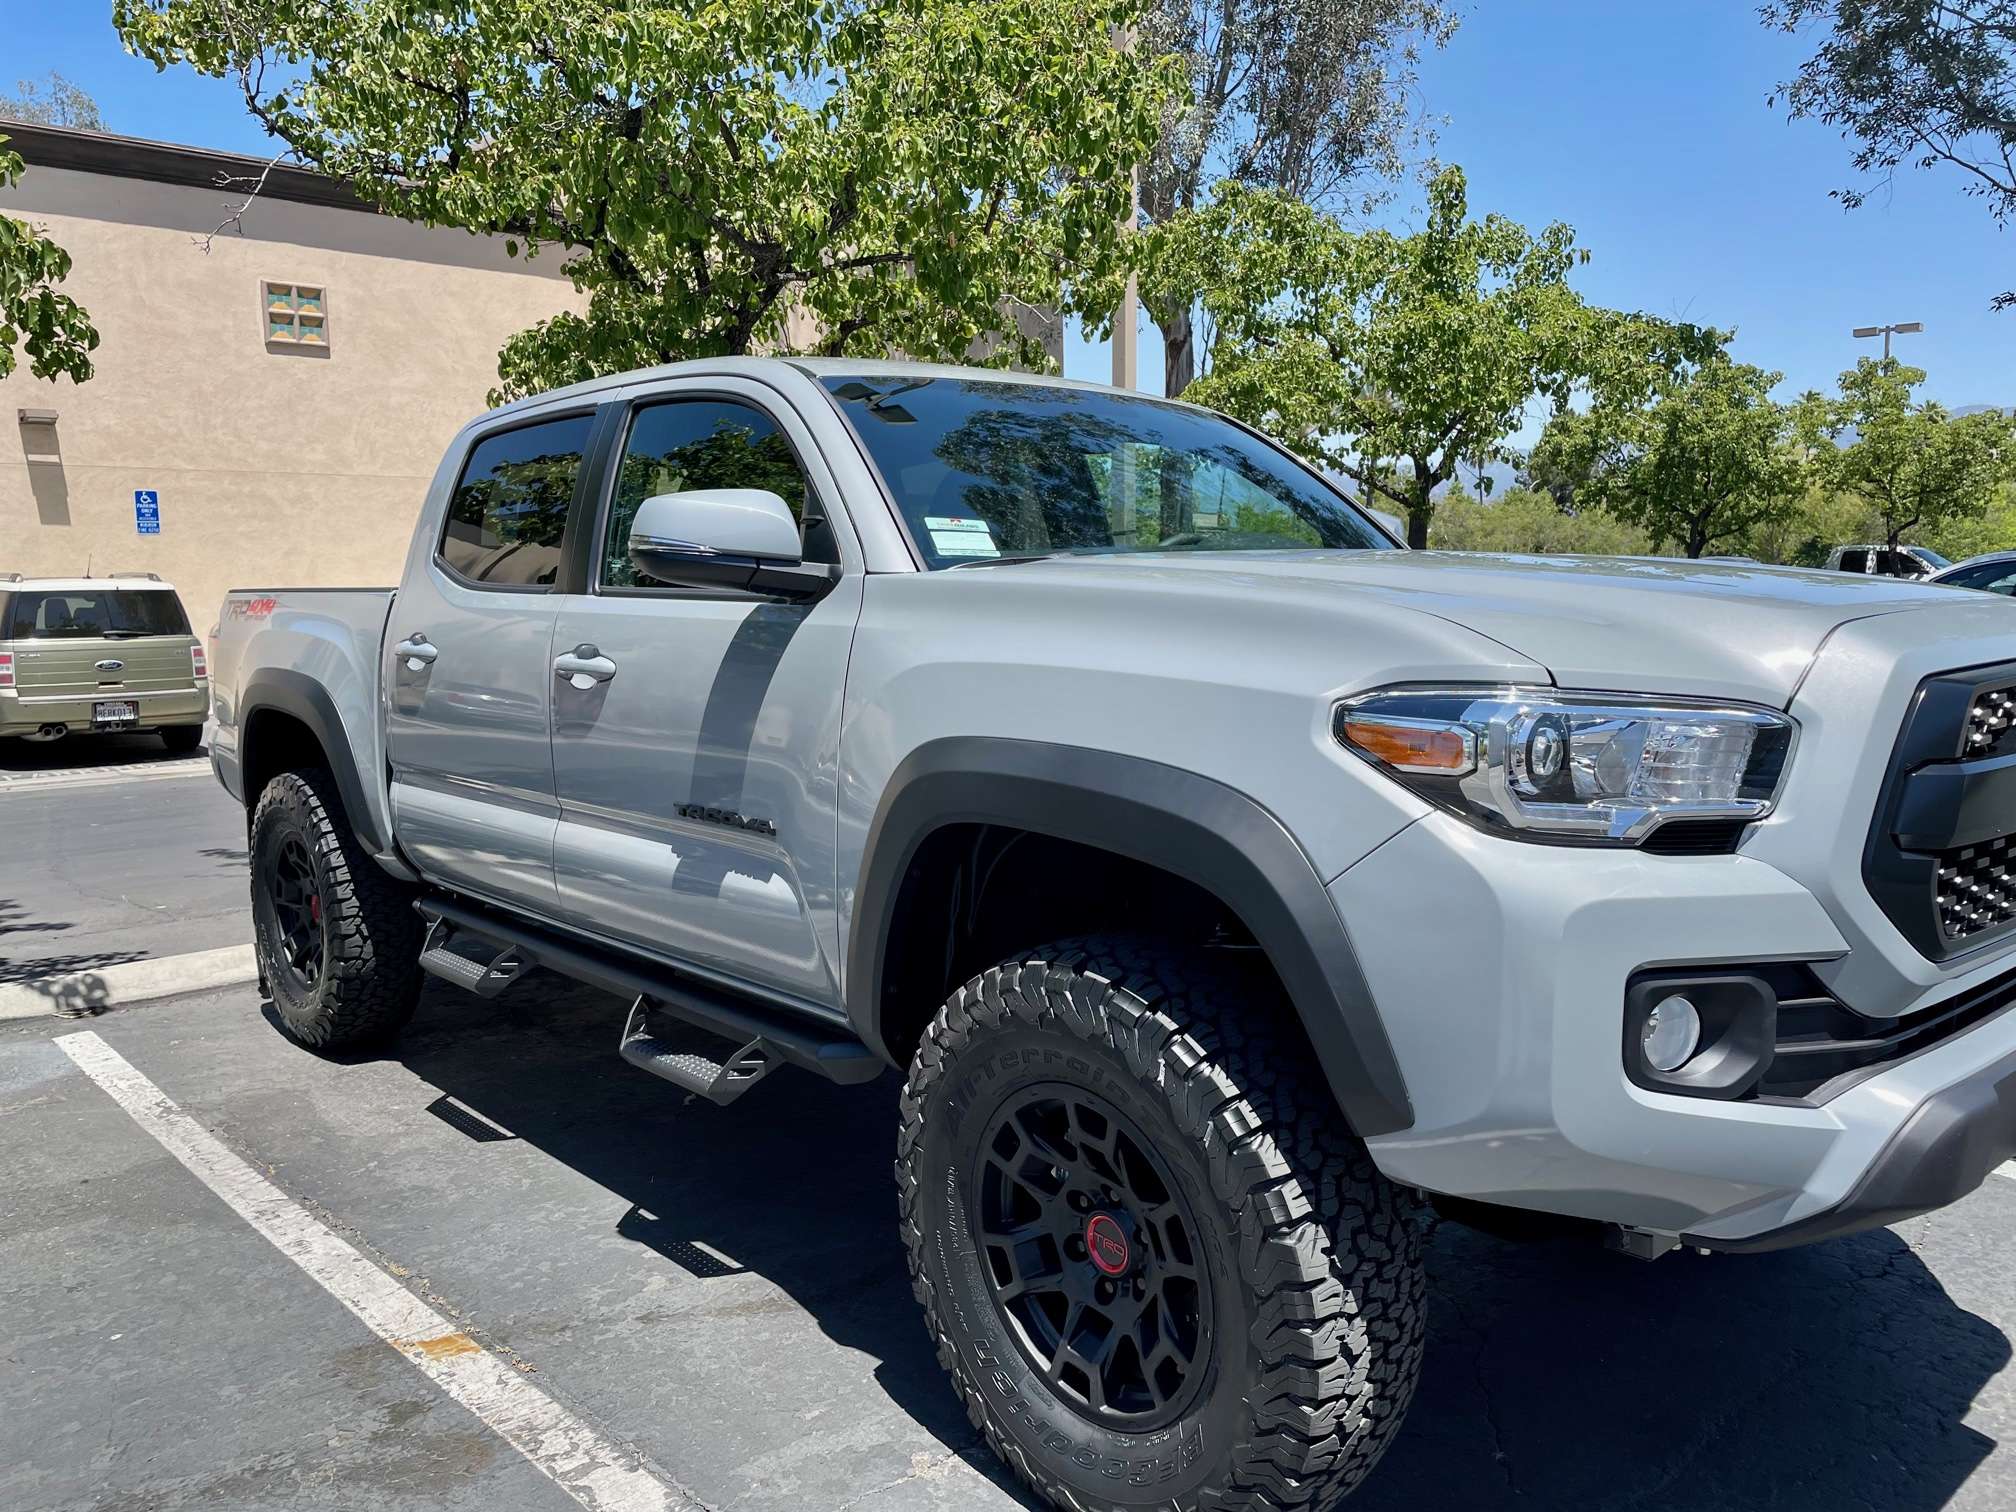 2021 Toyota Tacoma 4×4 Off Road package Cement Grey  Vilmont HQ